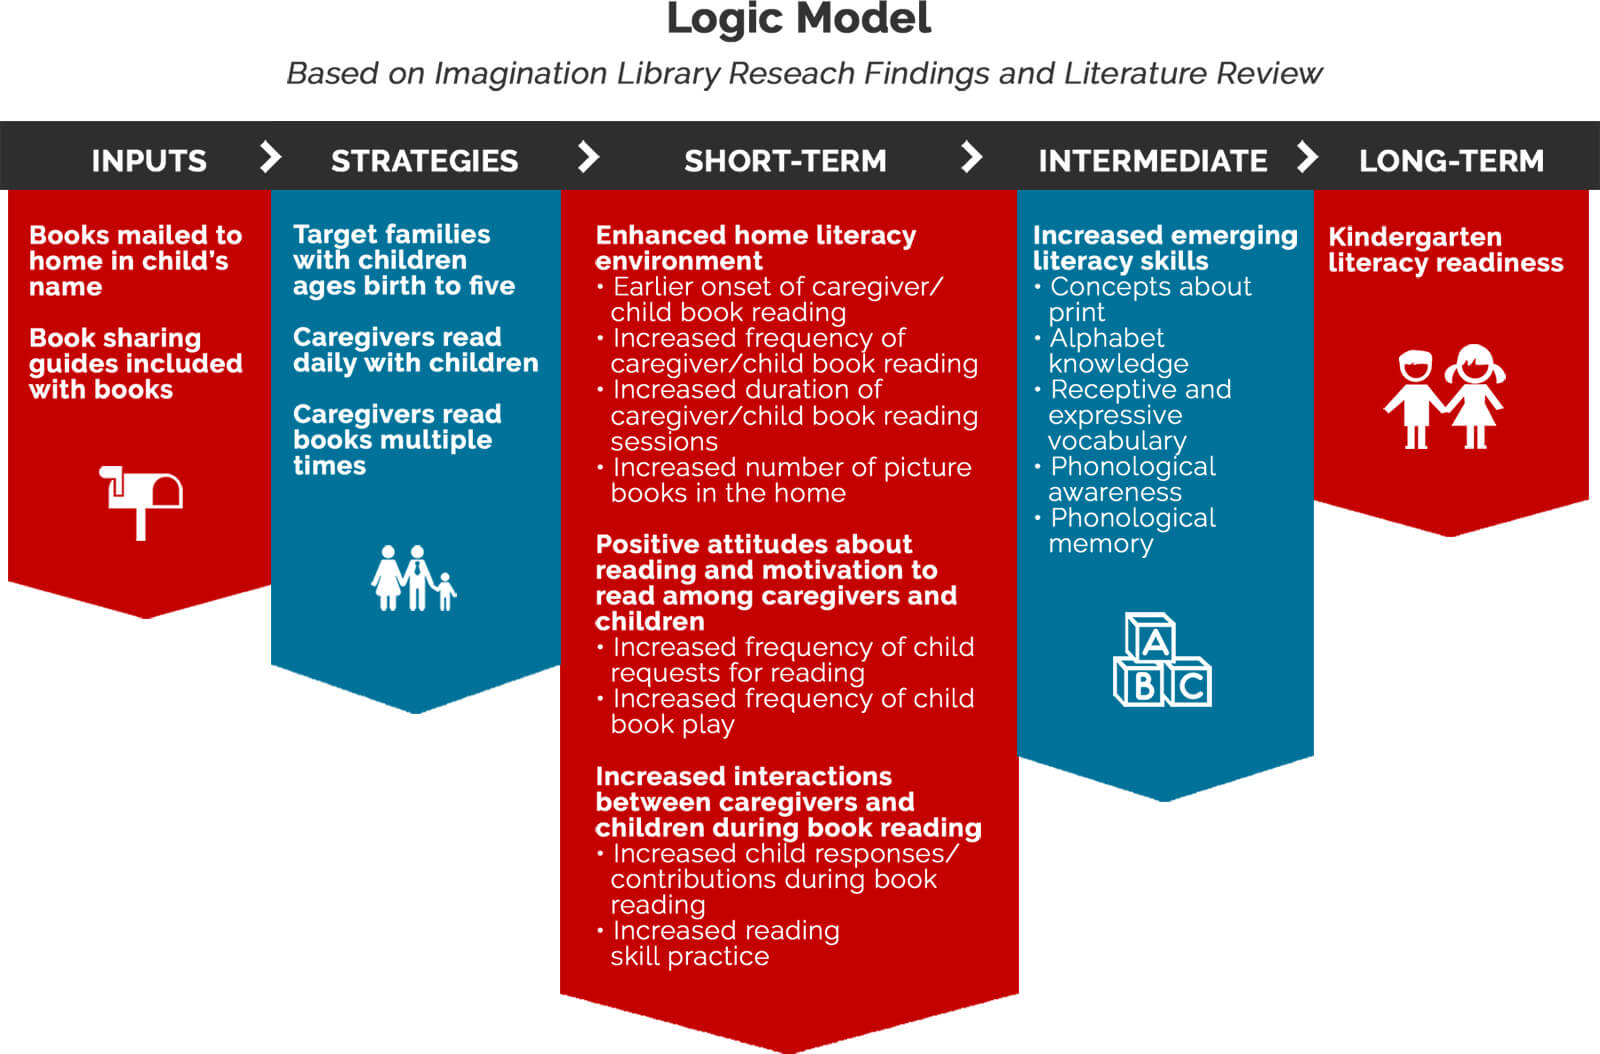 Dolly Parton's Imagination Library Research and Logic Model